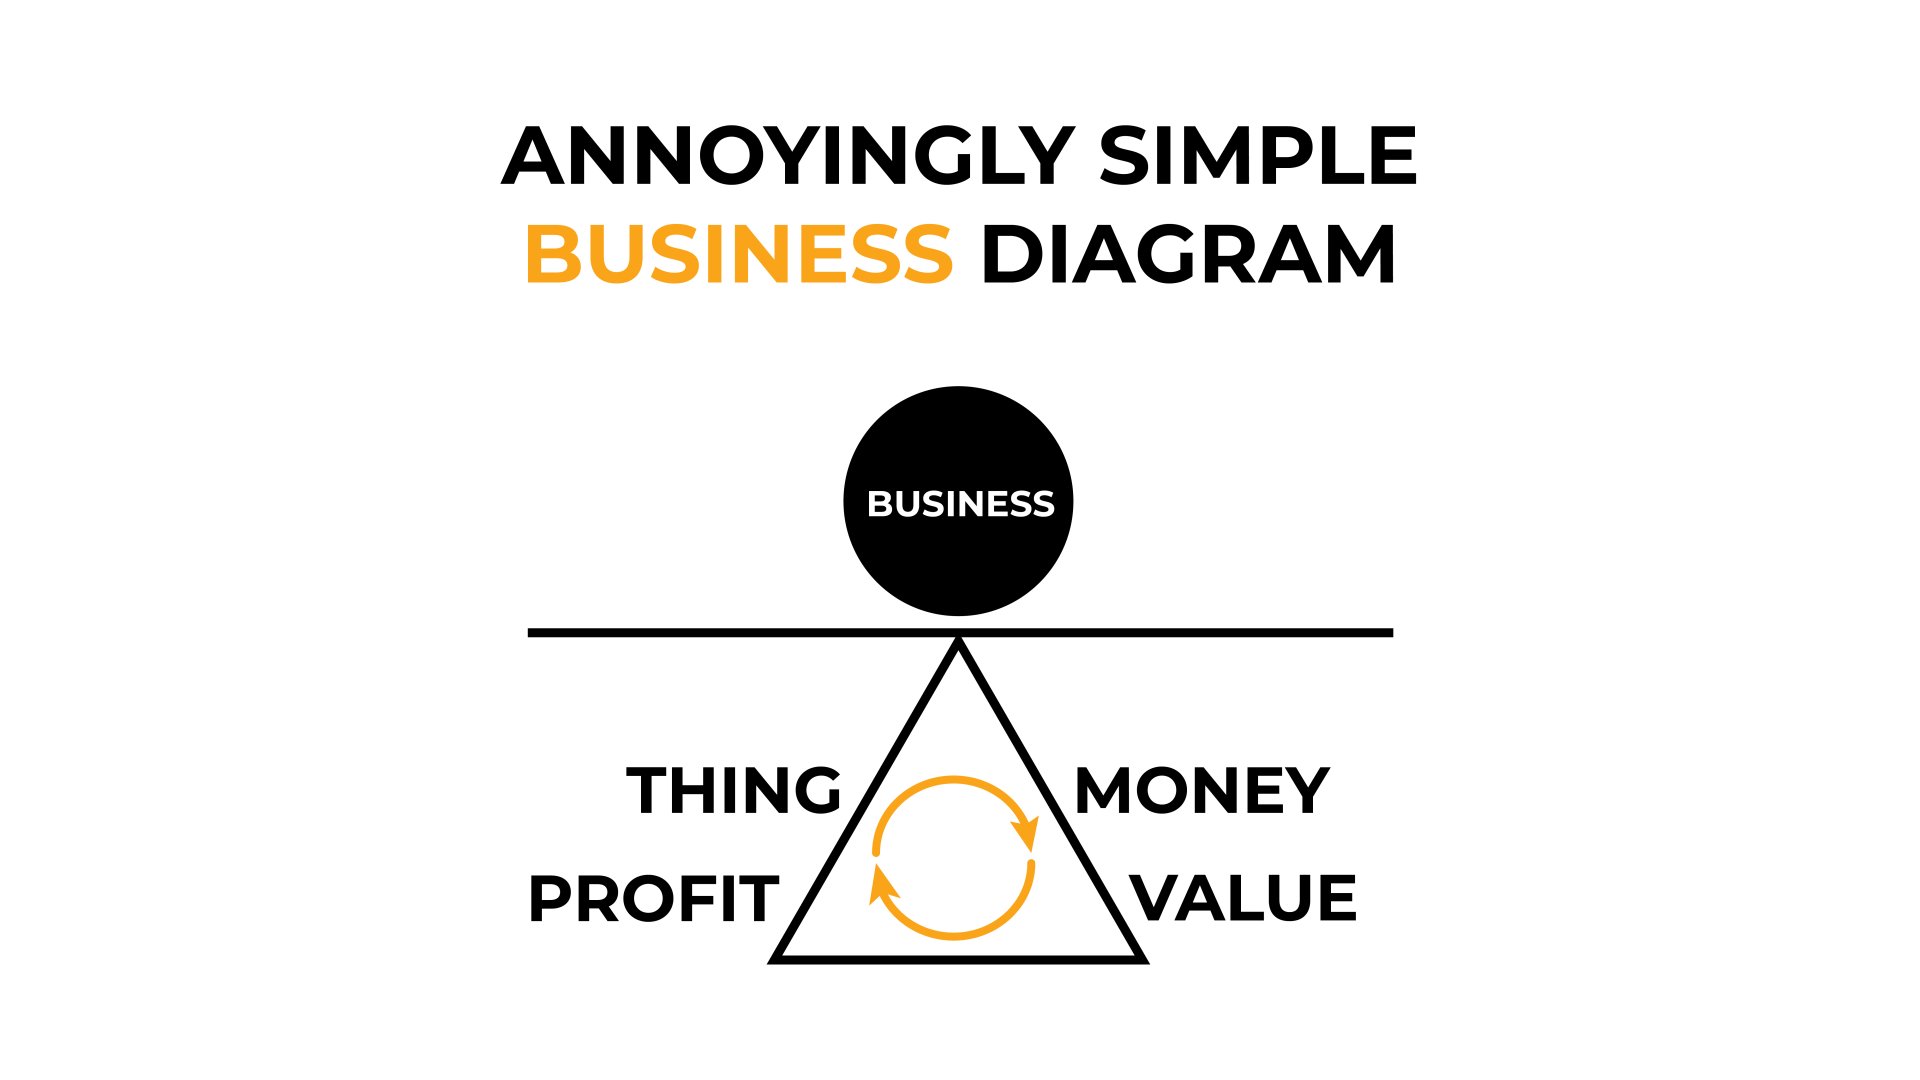 The Annoyingly Simple Business Diagram